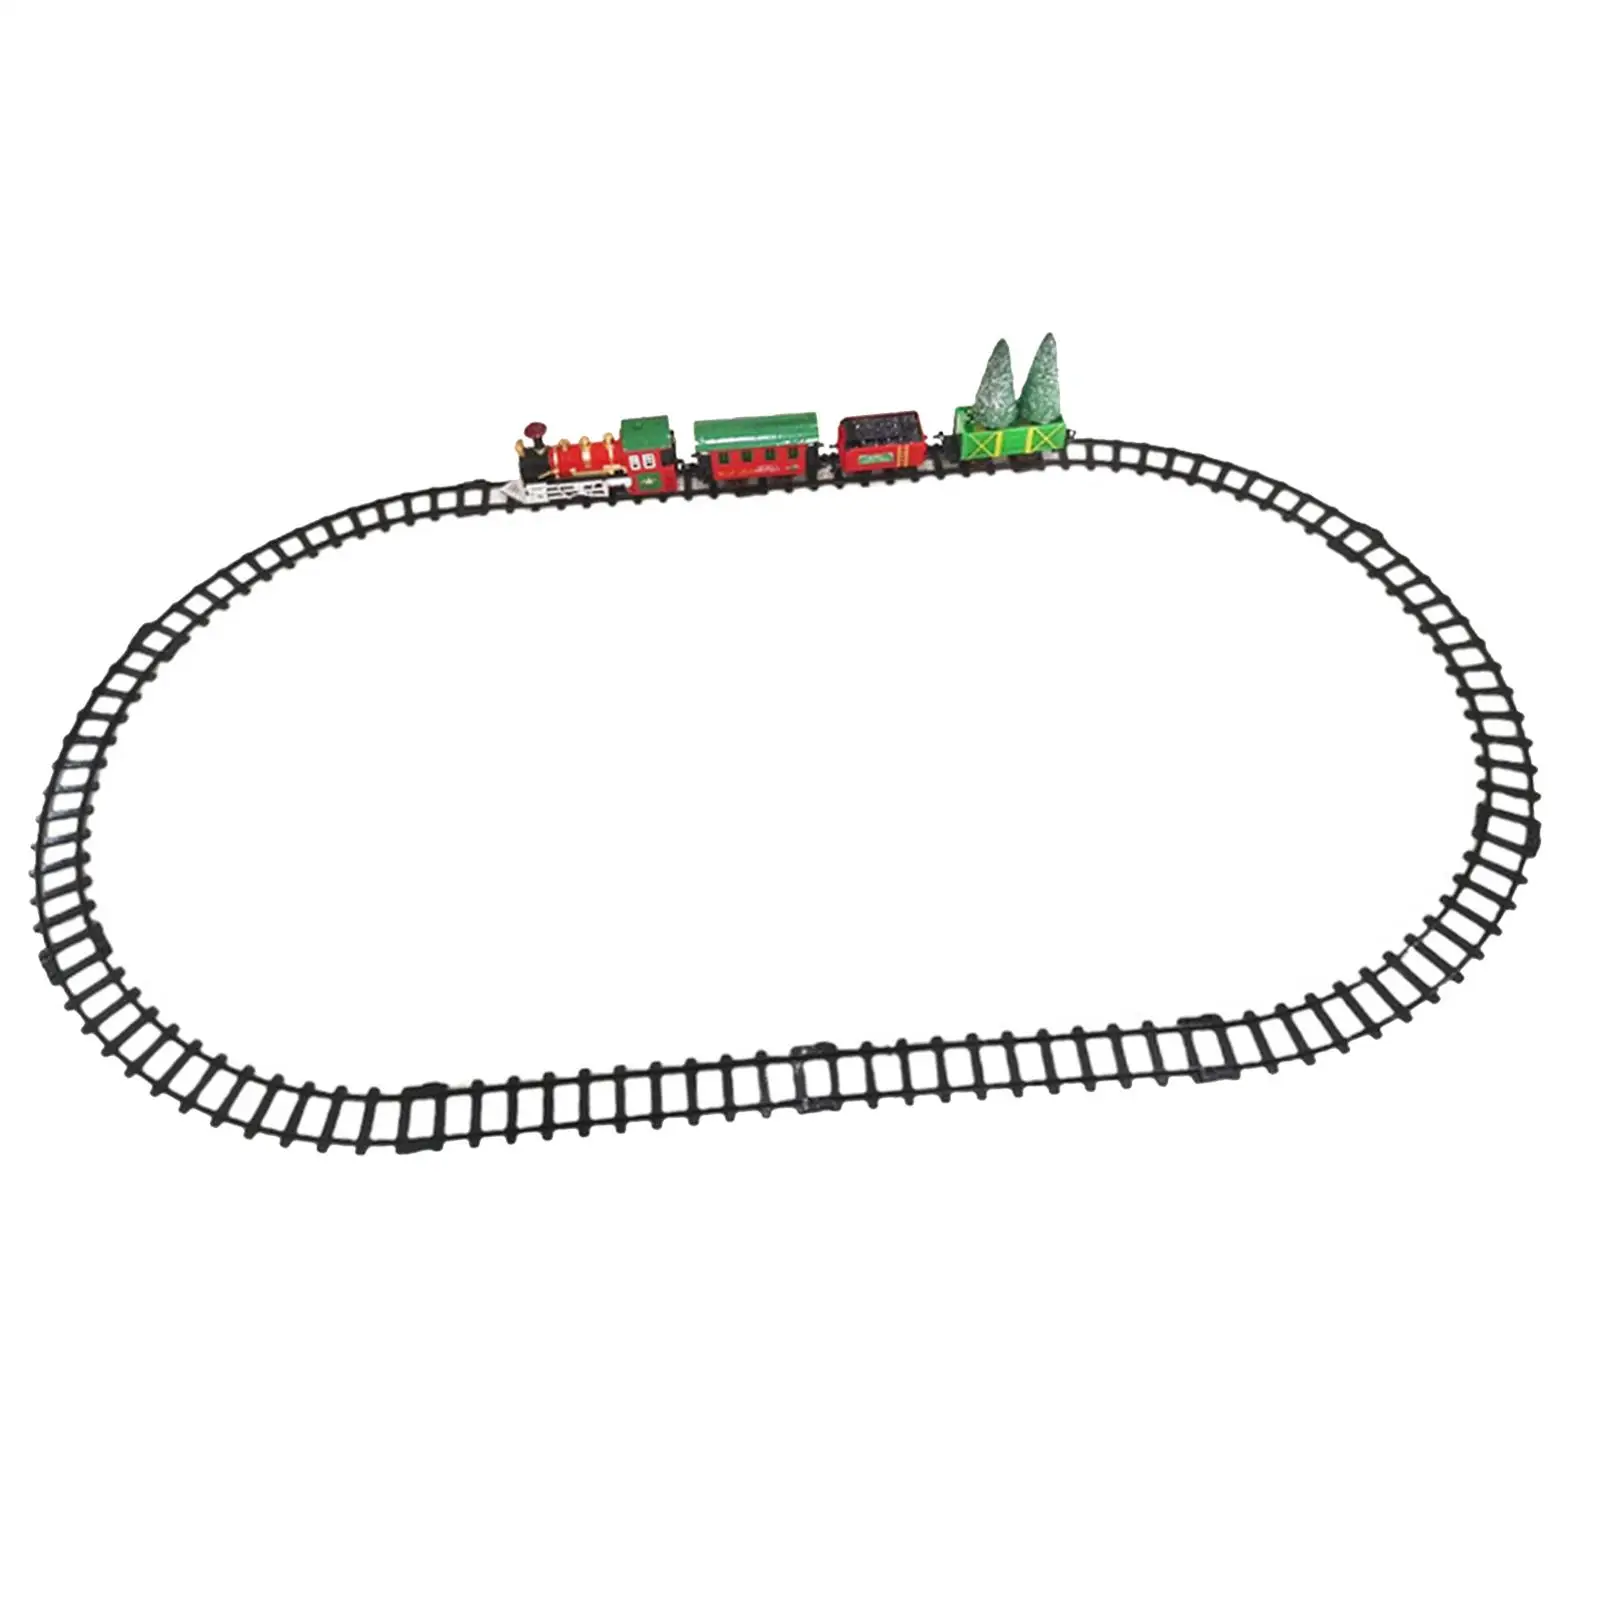 Railway Tracks Toy Electric Train Set Kid Toy Early Educational Toys Christmas